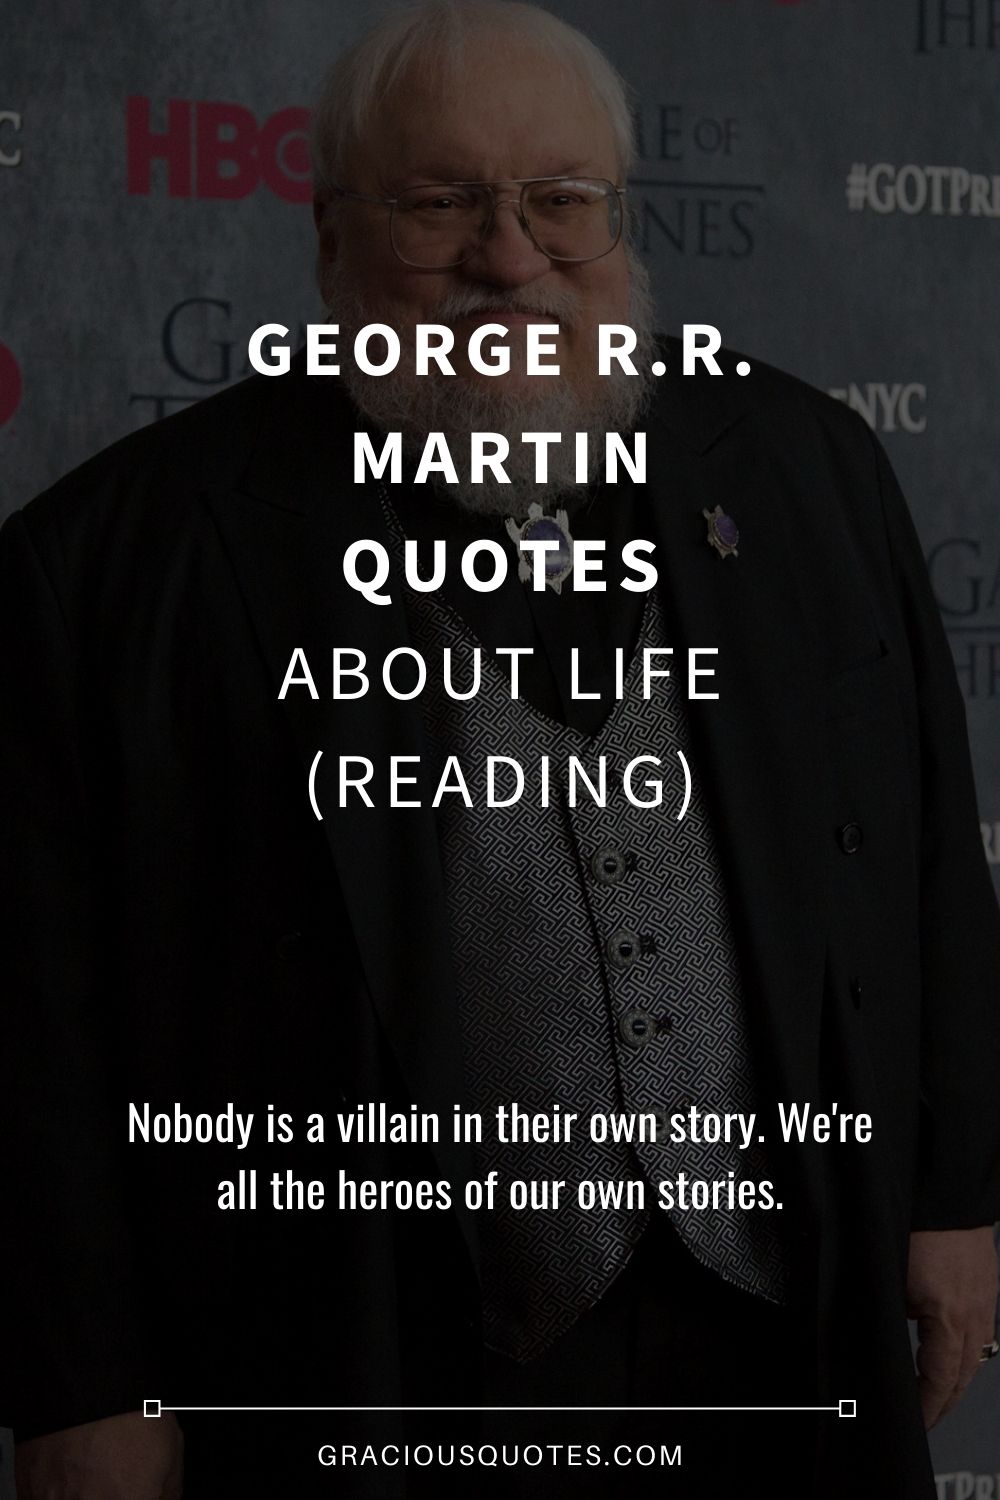 George R.R. Martin Quotes About Life (READING) - Gracious Quotes